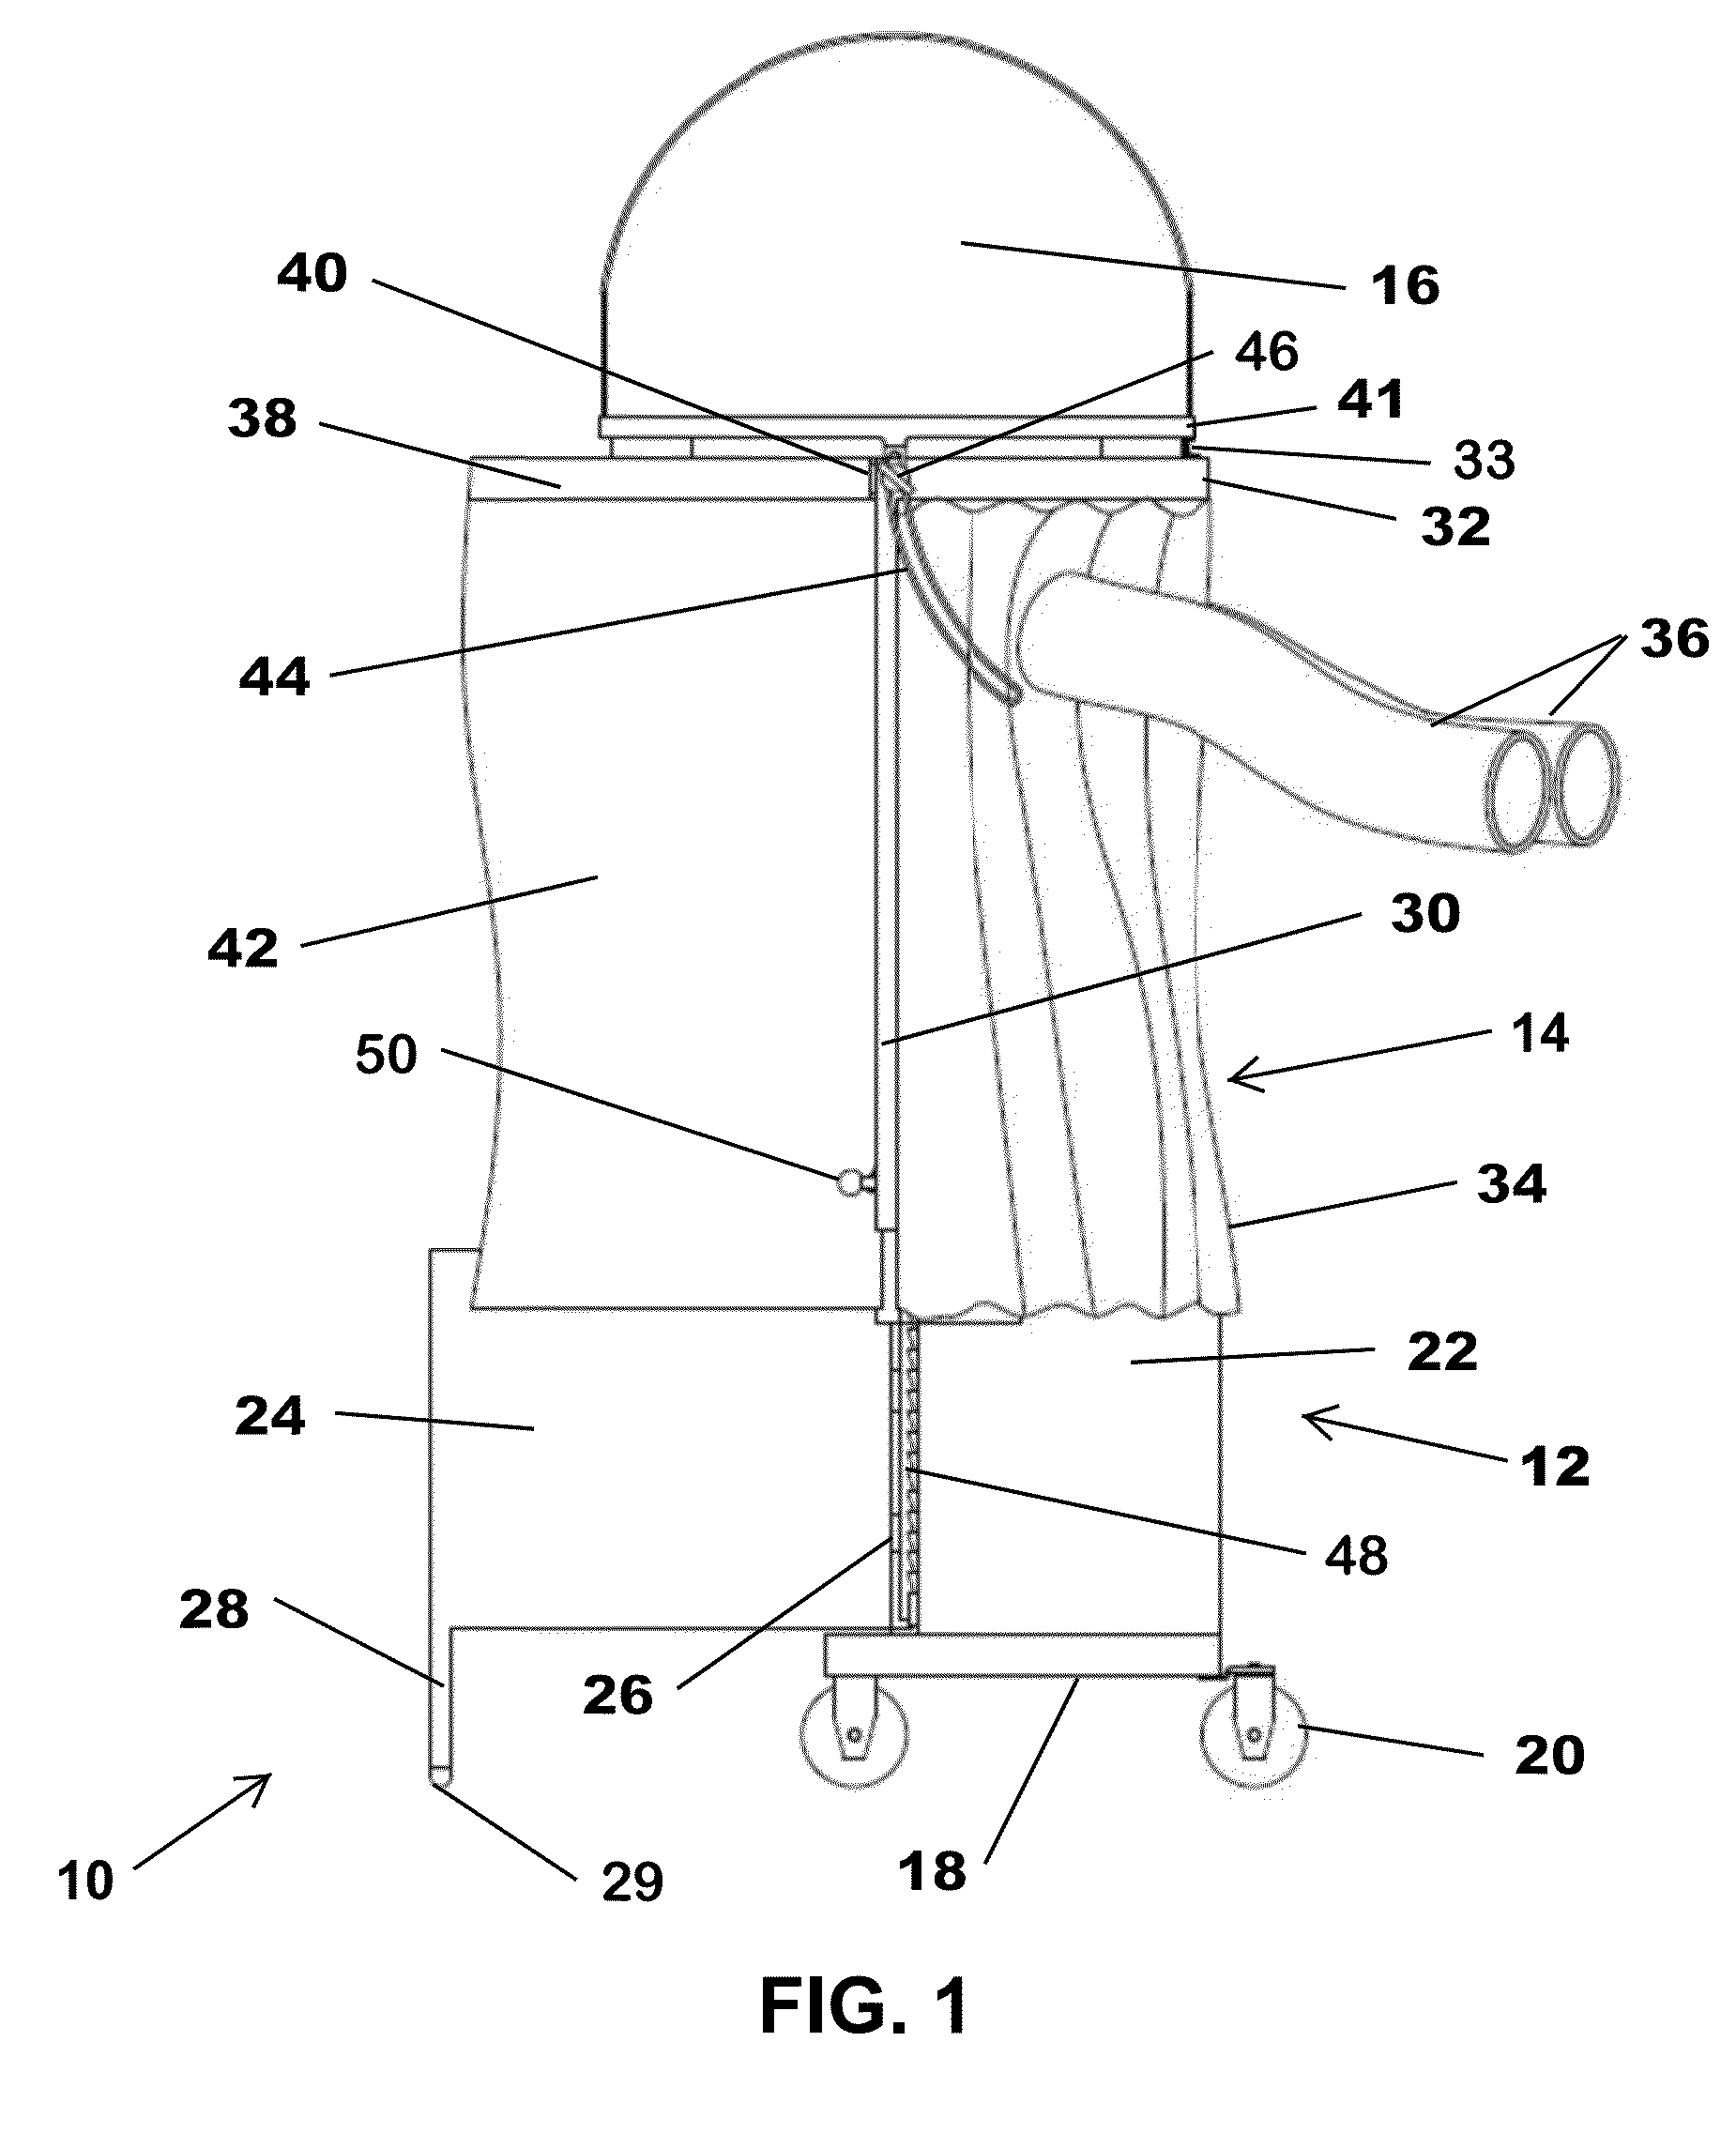 Movable radiologically protective enclosure for a physician or medical technician